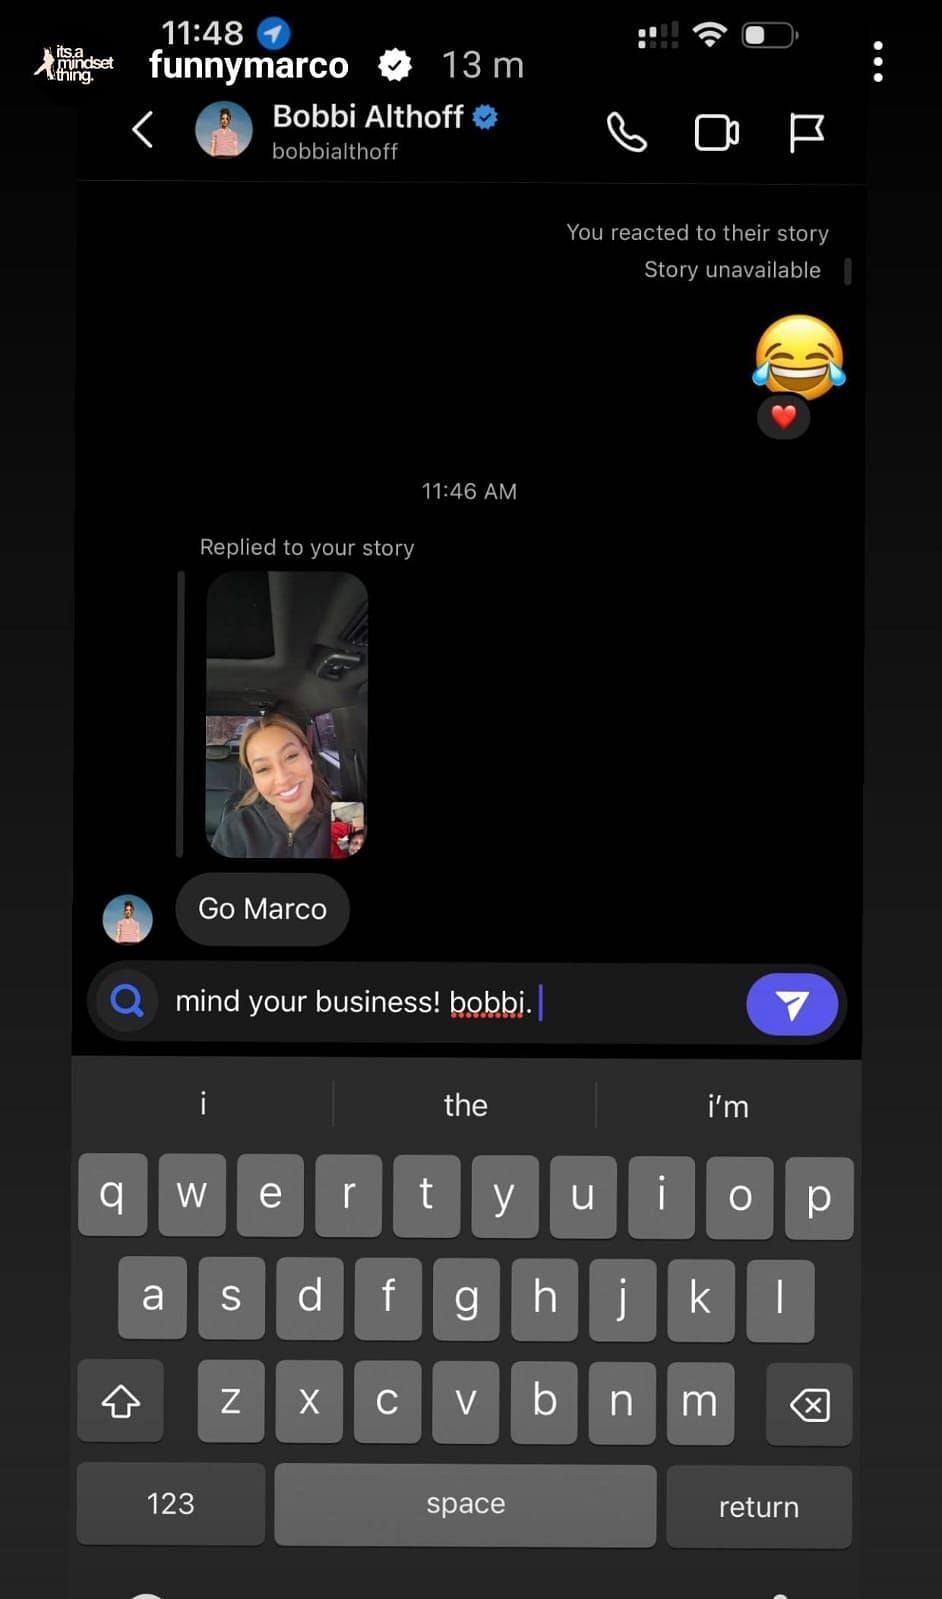 Funny Marco&#039;s hilarious response to Bobbi Althoff&#039;s comments